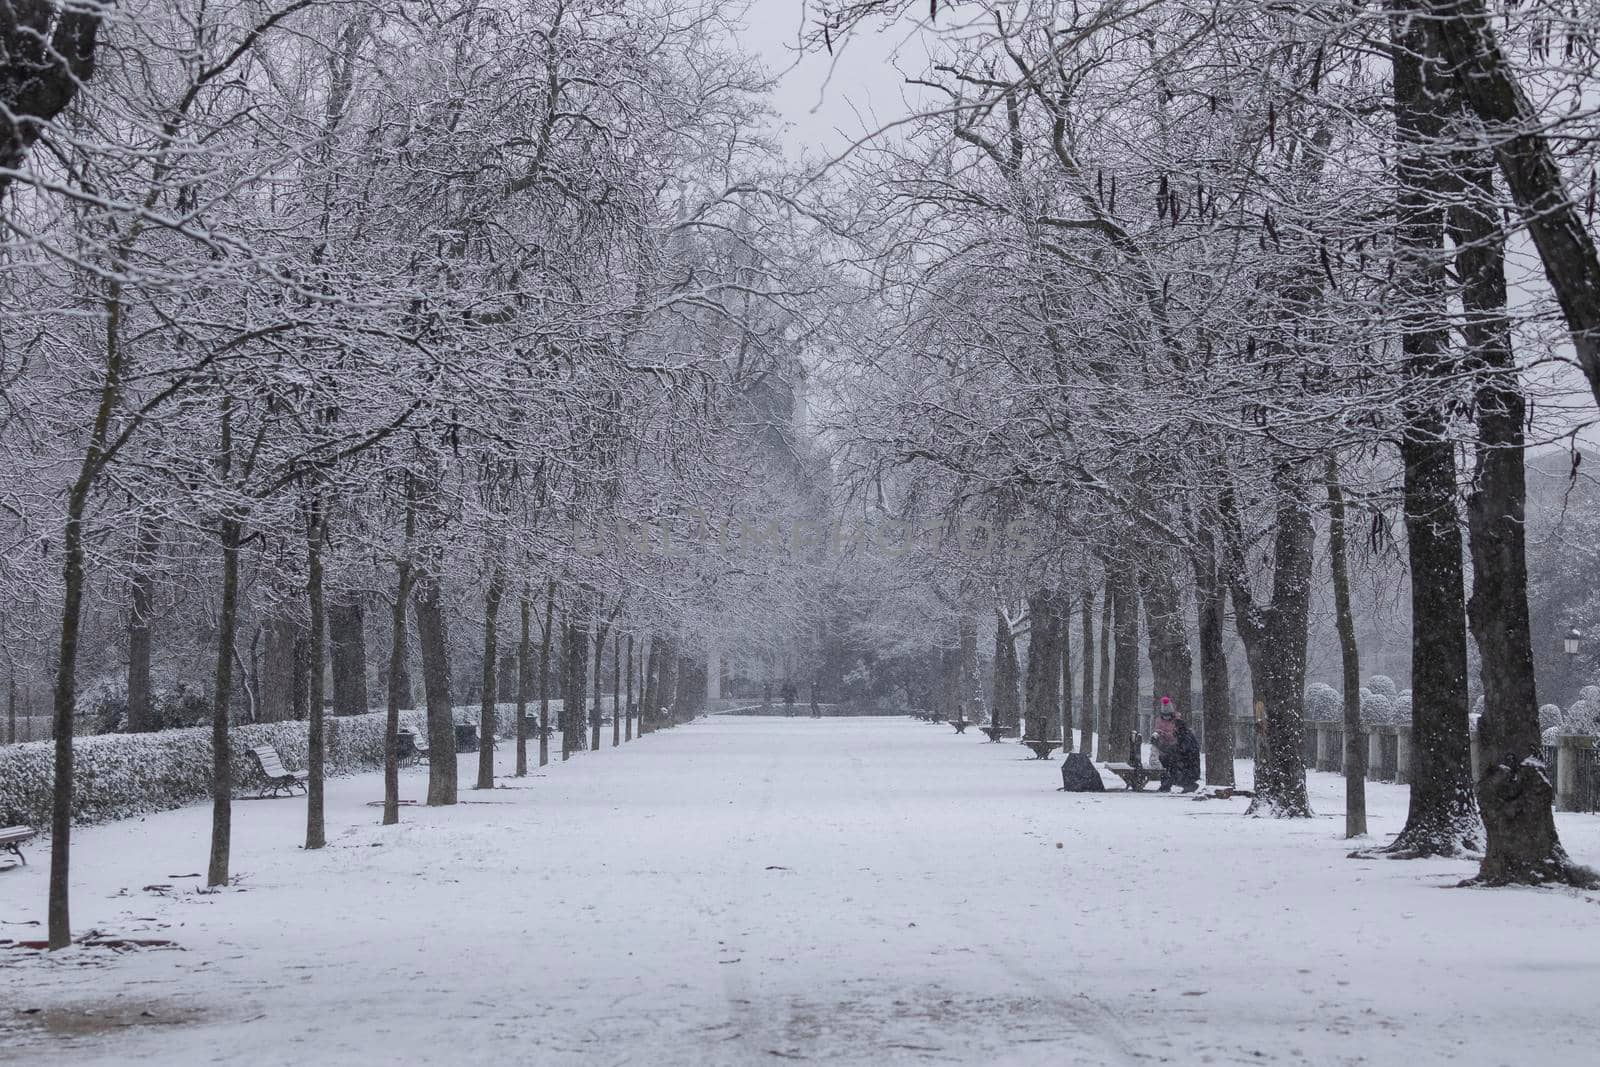 Madrid, Spain - January 07, 2021: General view of one of the paths of the Buen Retiro park in Madrid, in the middle of a snowy day, due to a wave of polar cold.